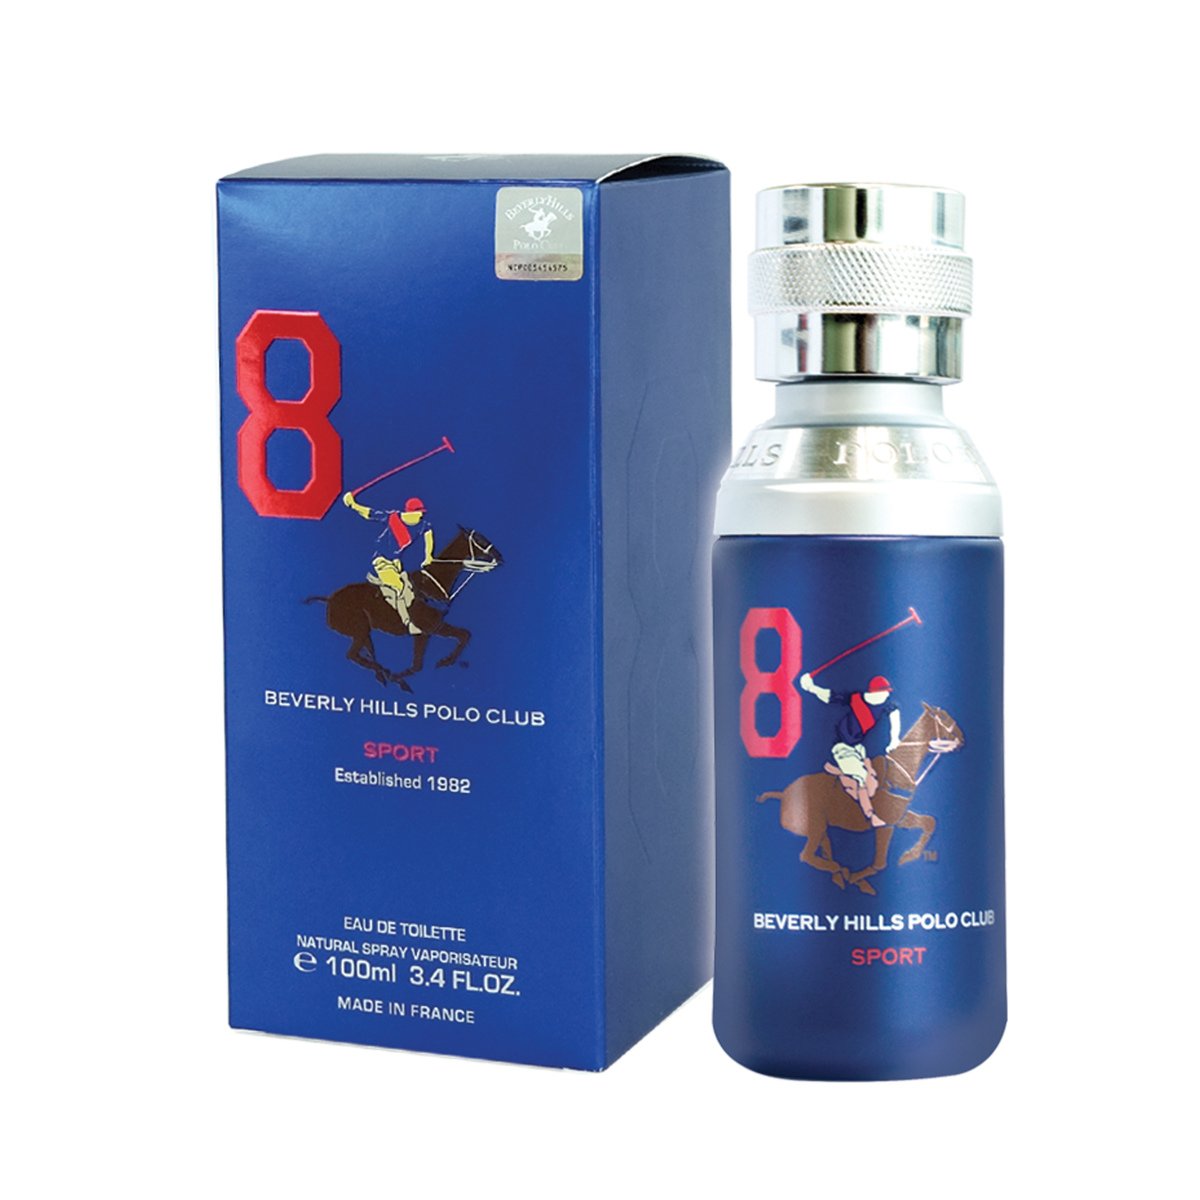 Beverly Hills Polo Club Sport 8 EDT for Men 100 ml